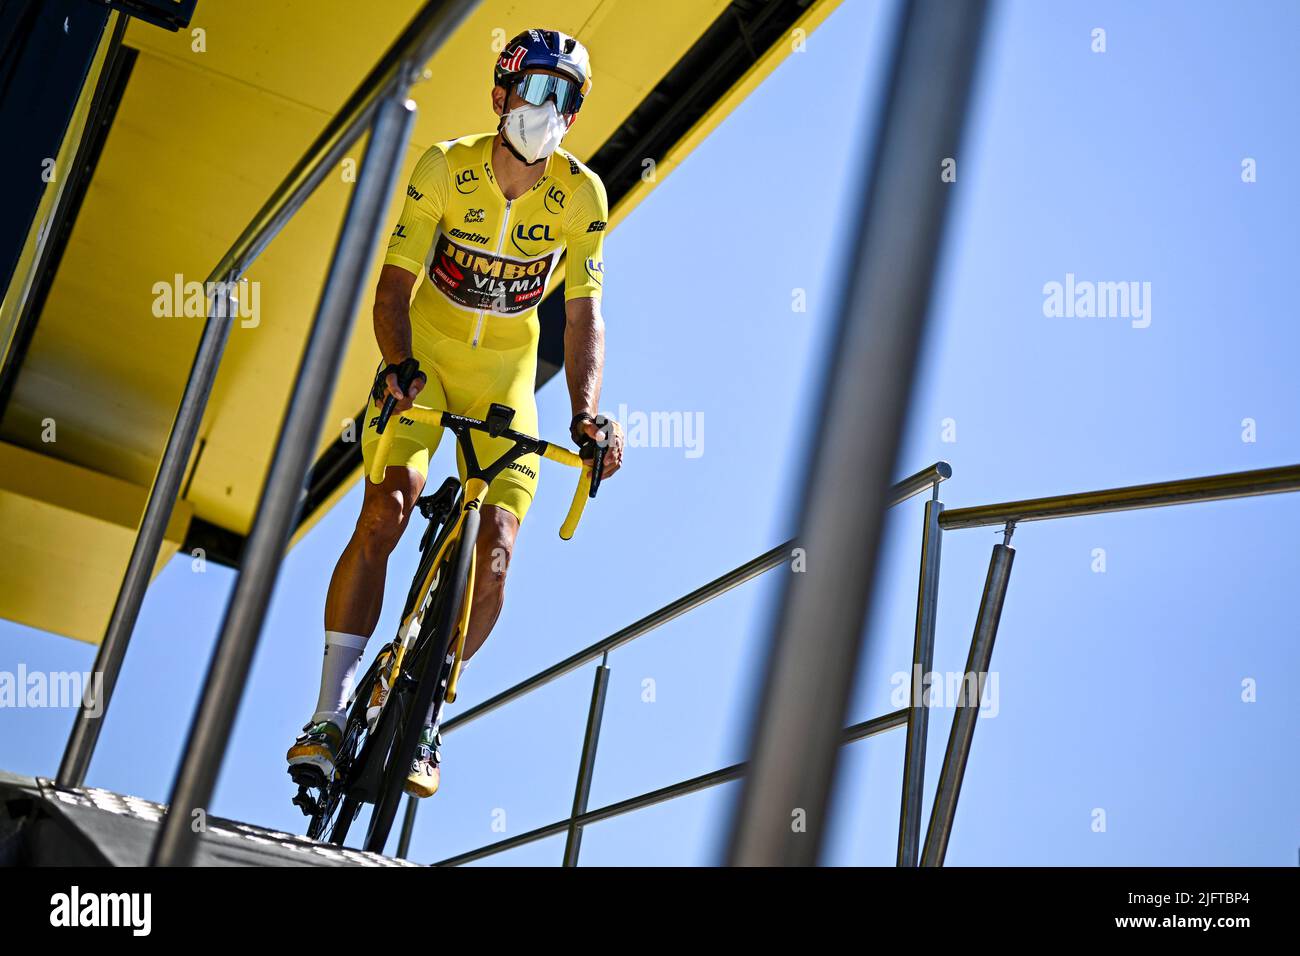 Dunkerque, France. 05th July, 2022. Belgian Wout Van Aert of Team Jumbo-Visma pictured at the start of stage four of the Tour de France cycling race, a 171.5 km race from Dunkerque to Calais, France on Tuesday 05 July 2022. This year's Tour de France takes place from 01 to 24 July 2022. BELGA PHOTO JASPER JACOBS - UK OUT Credit: Belga News Agency/Alamy Live News Stock Photo